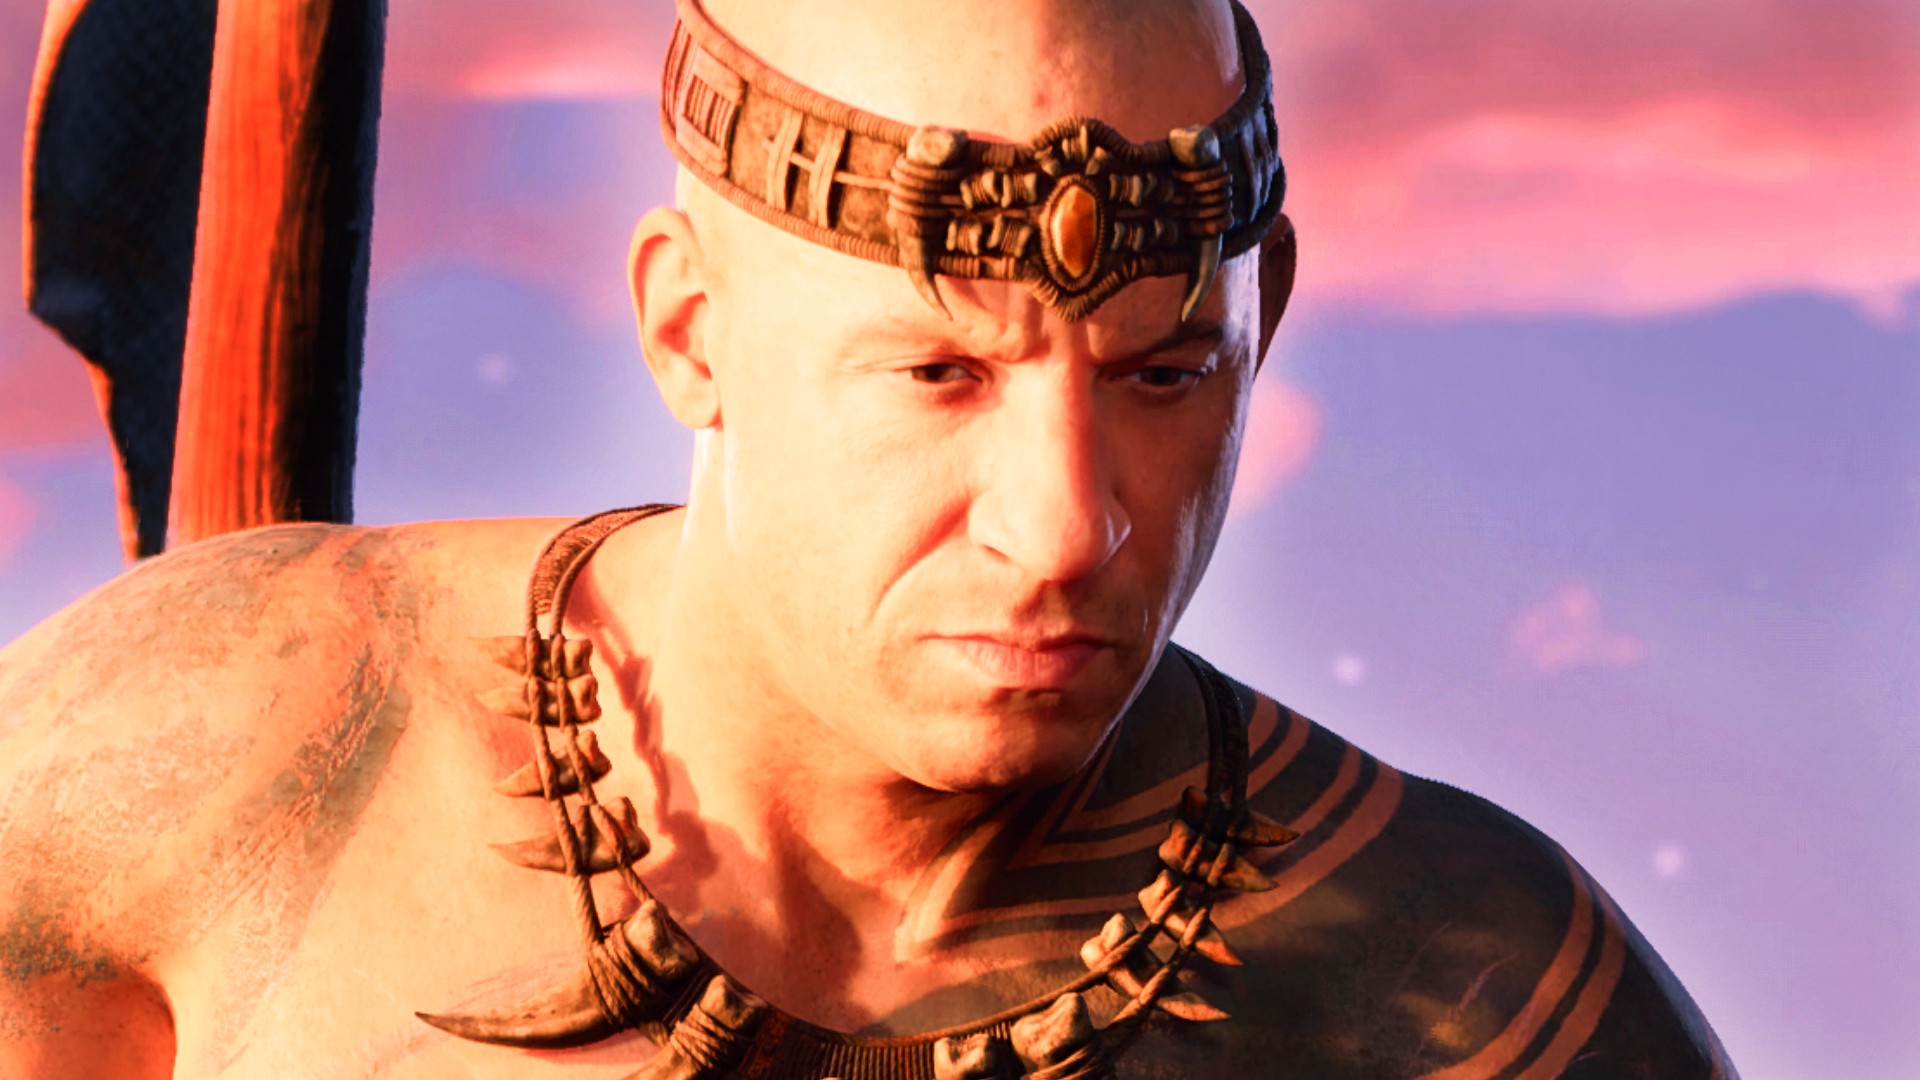 ARK 2 Game Release Date News, Vin Diesel Story Explained, and More